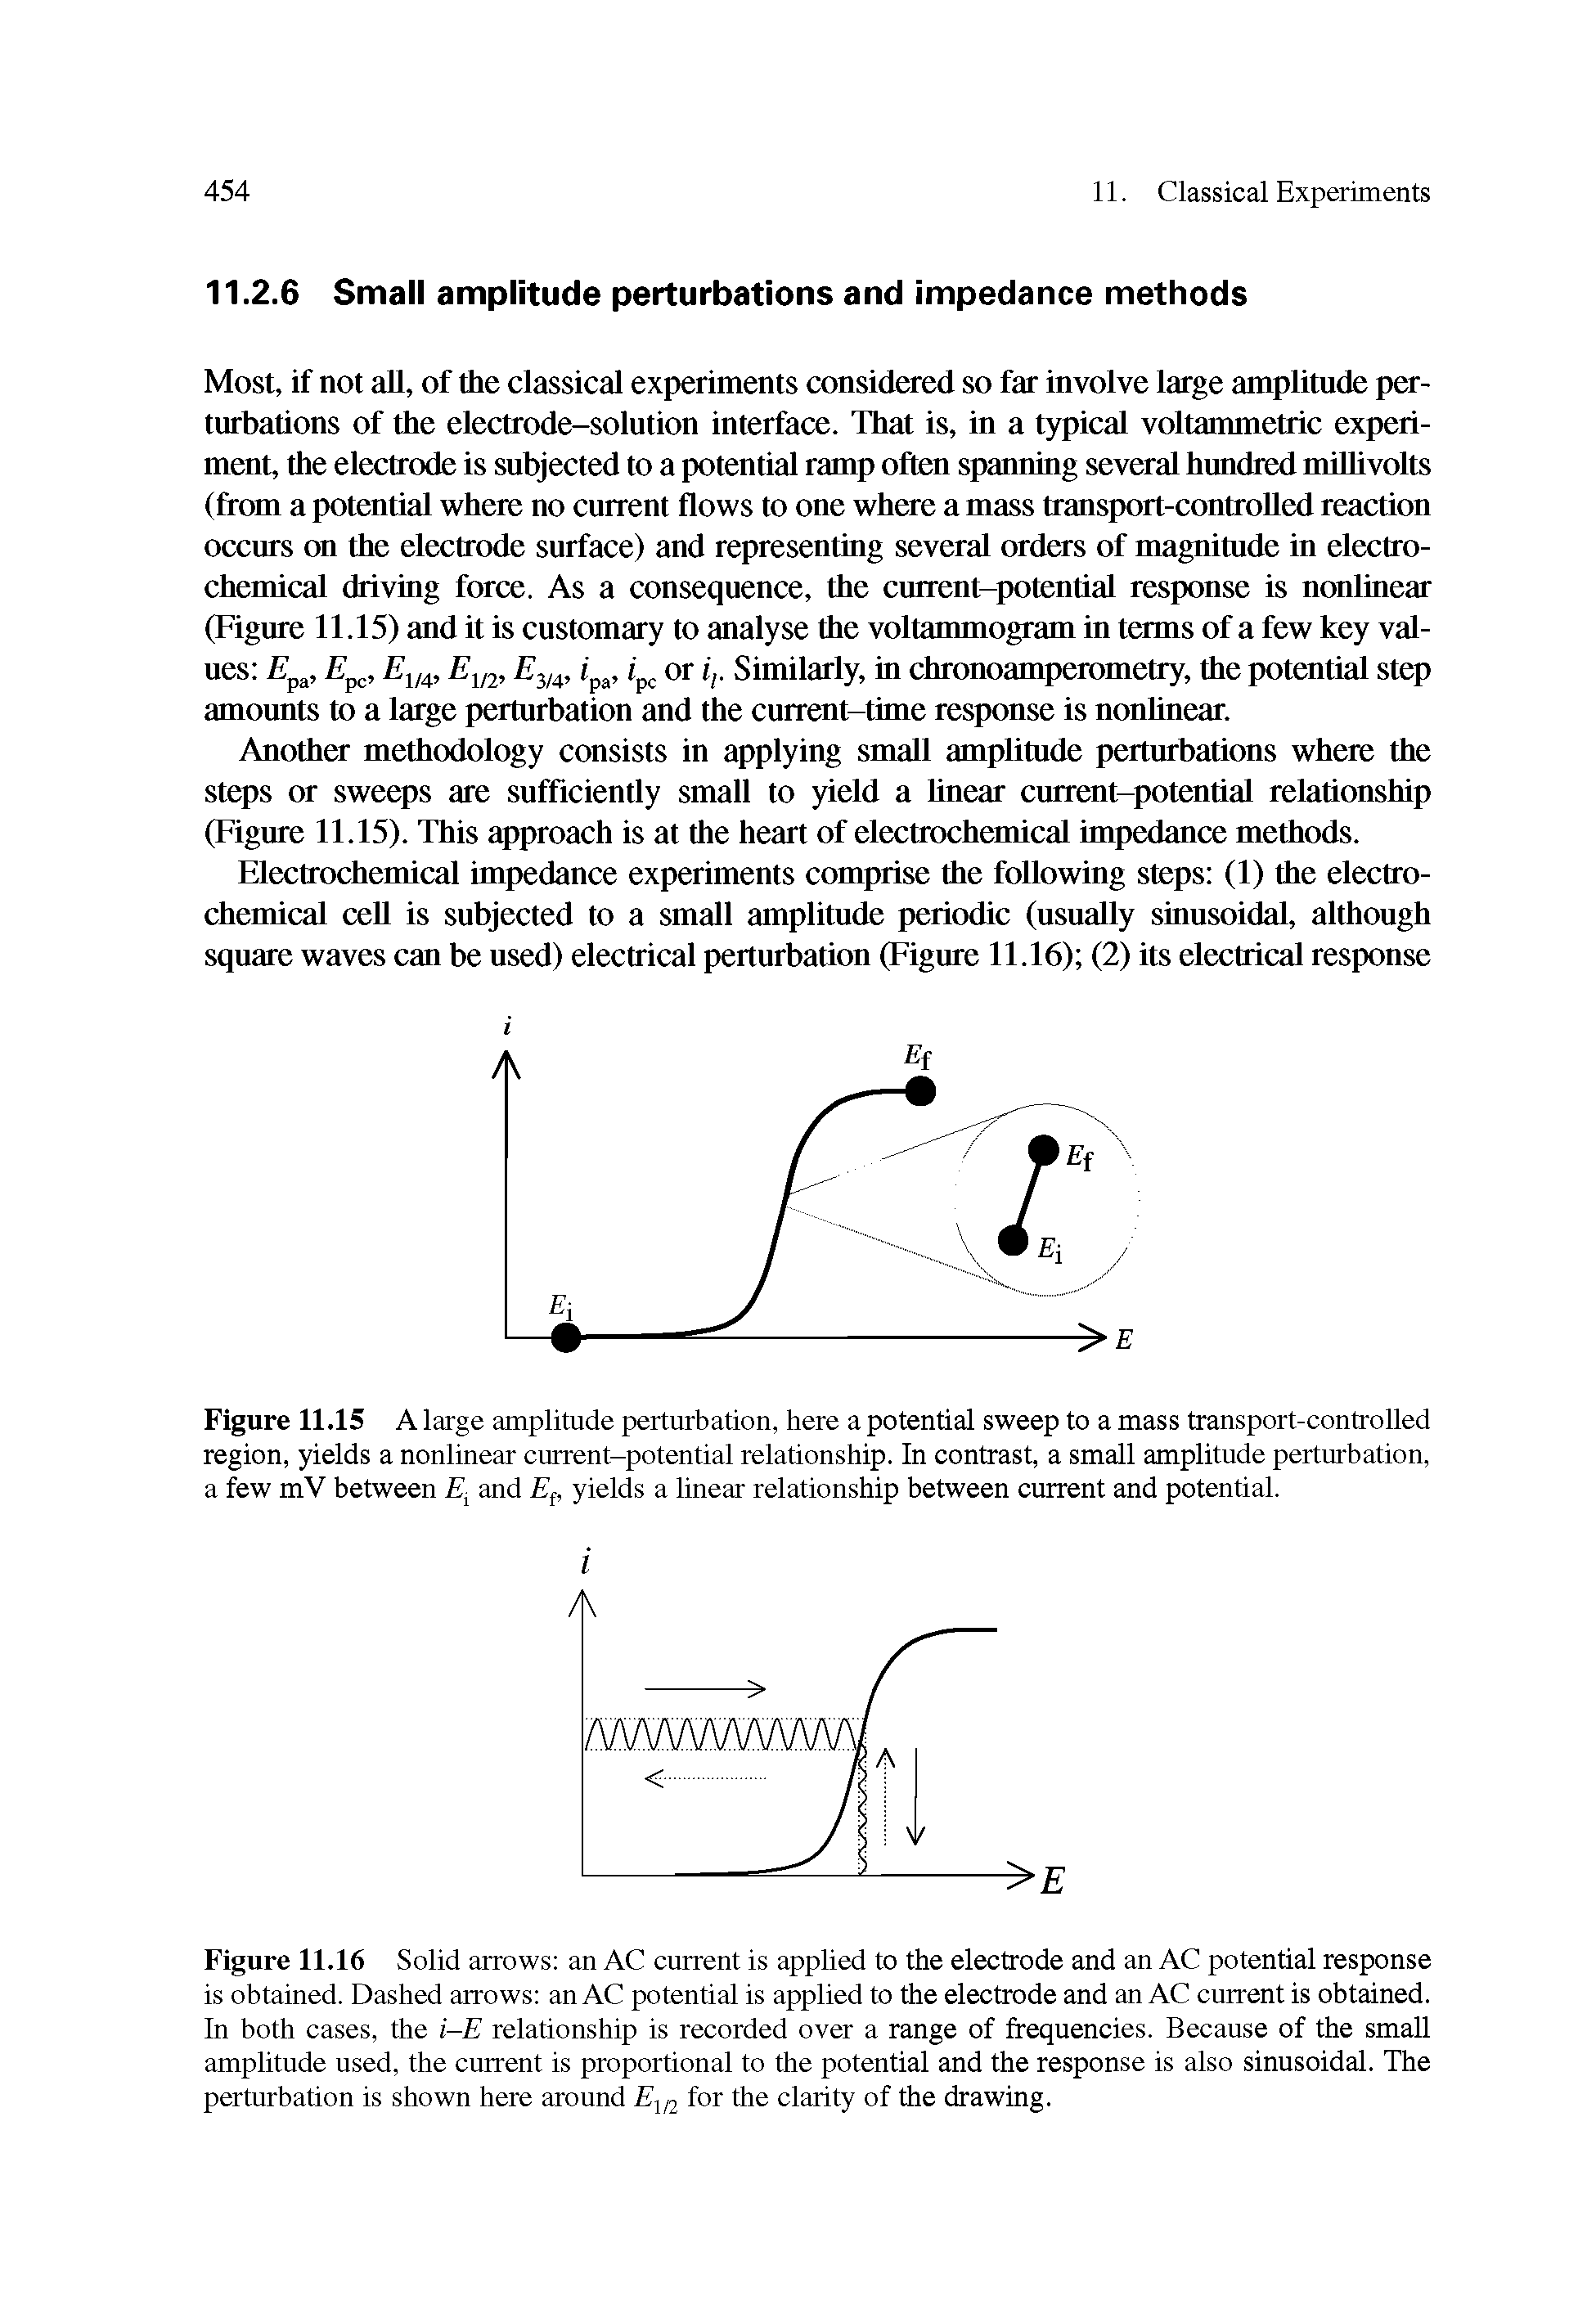 Figure 11.15 A large amplitude perturbation, here a potential sweep to a mass transport-controlled region, yields a nonlinear current-potential relationship. In contrast, a small amplitude perturbation, a few mV between and yields a linear relationship between current and potential.